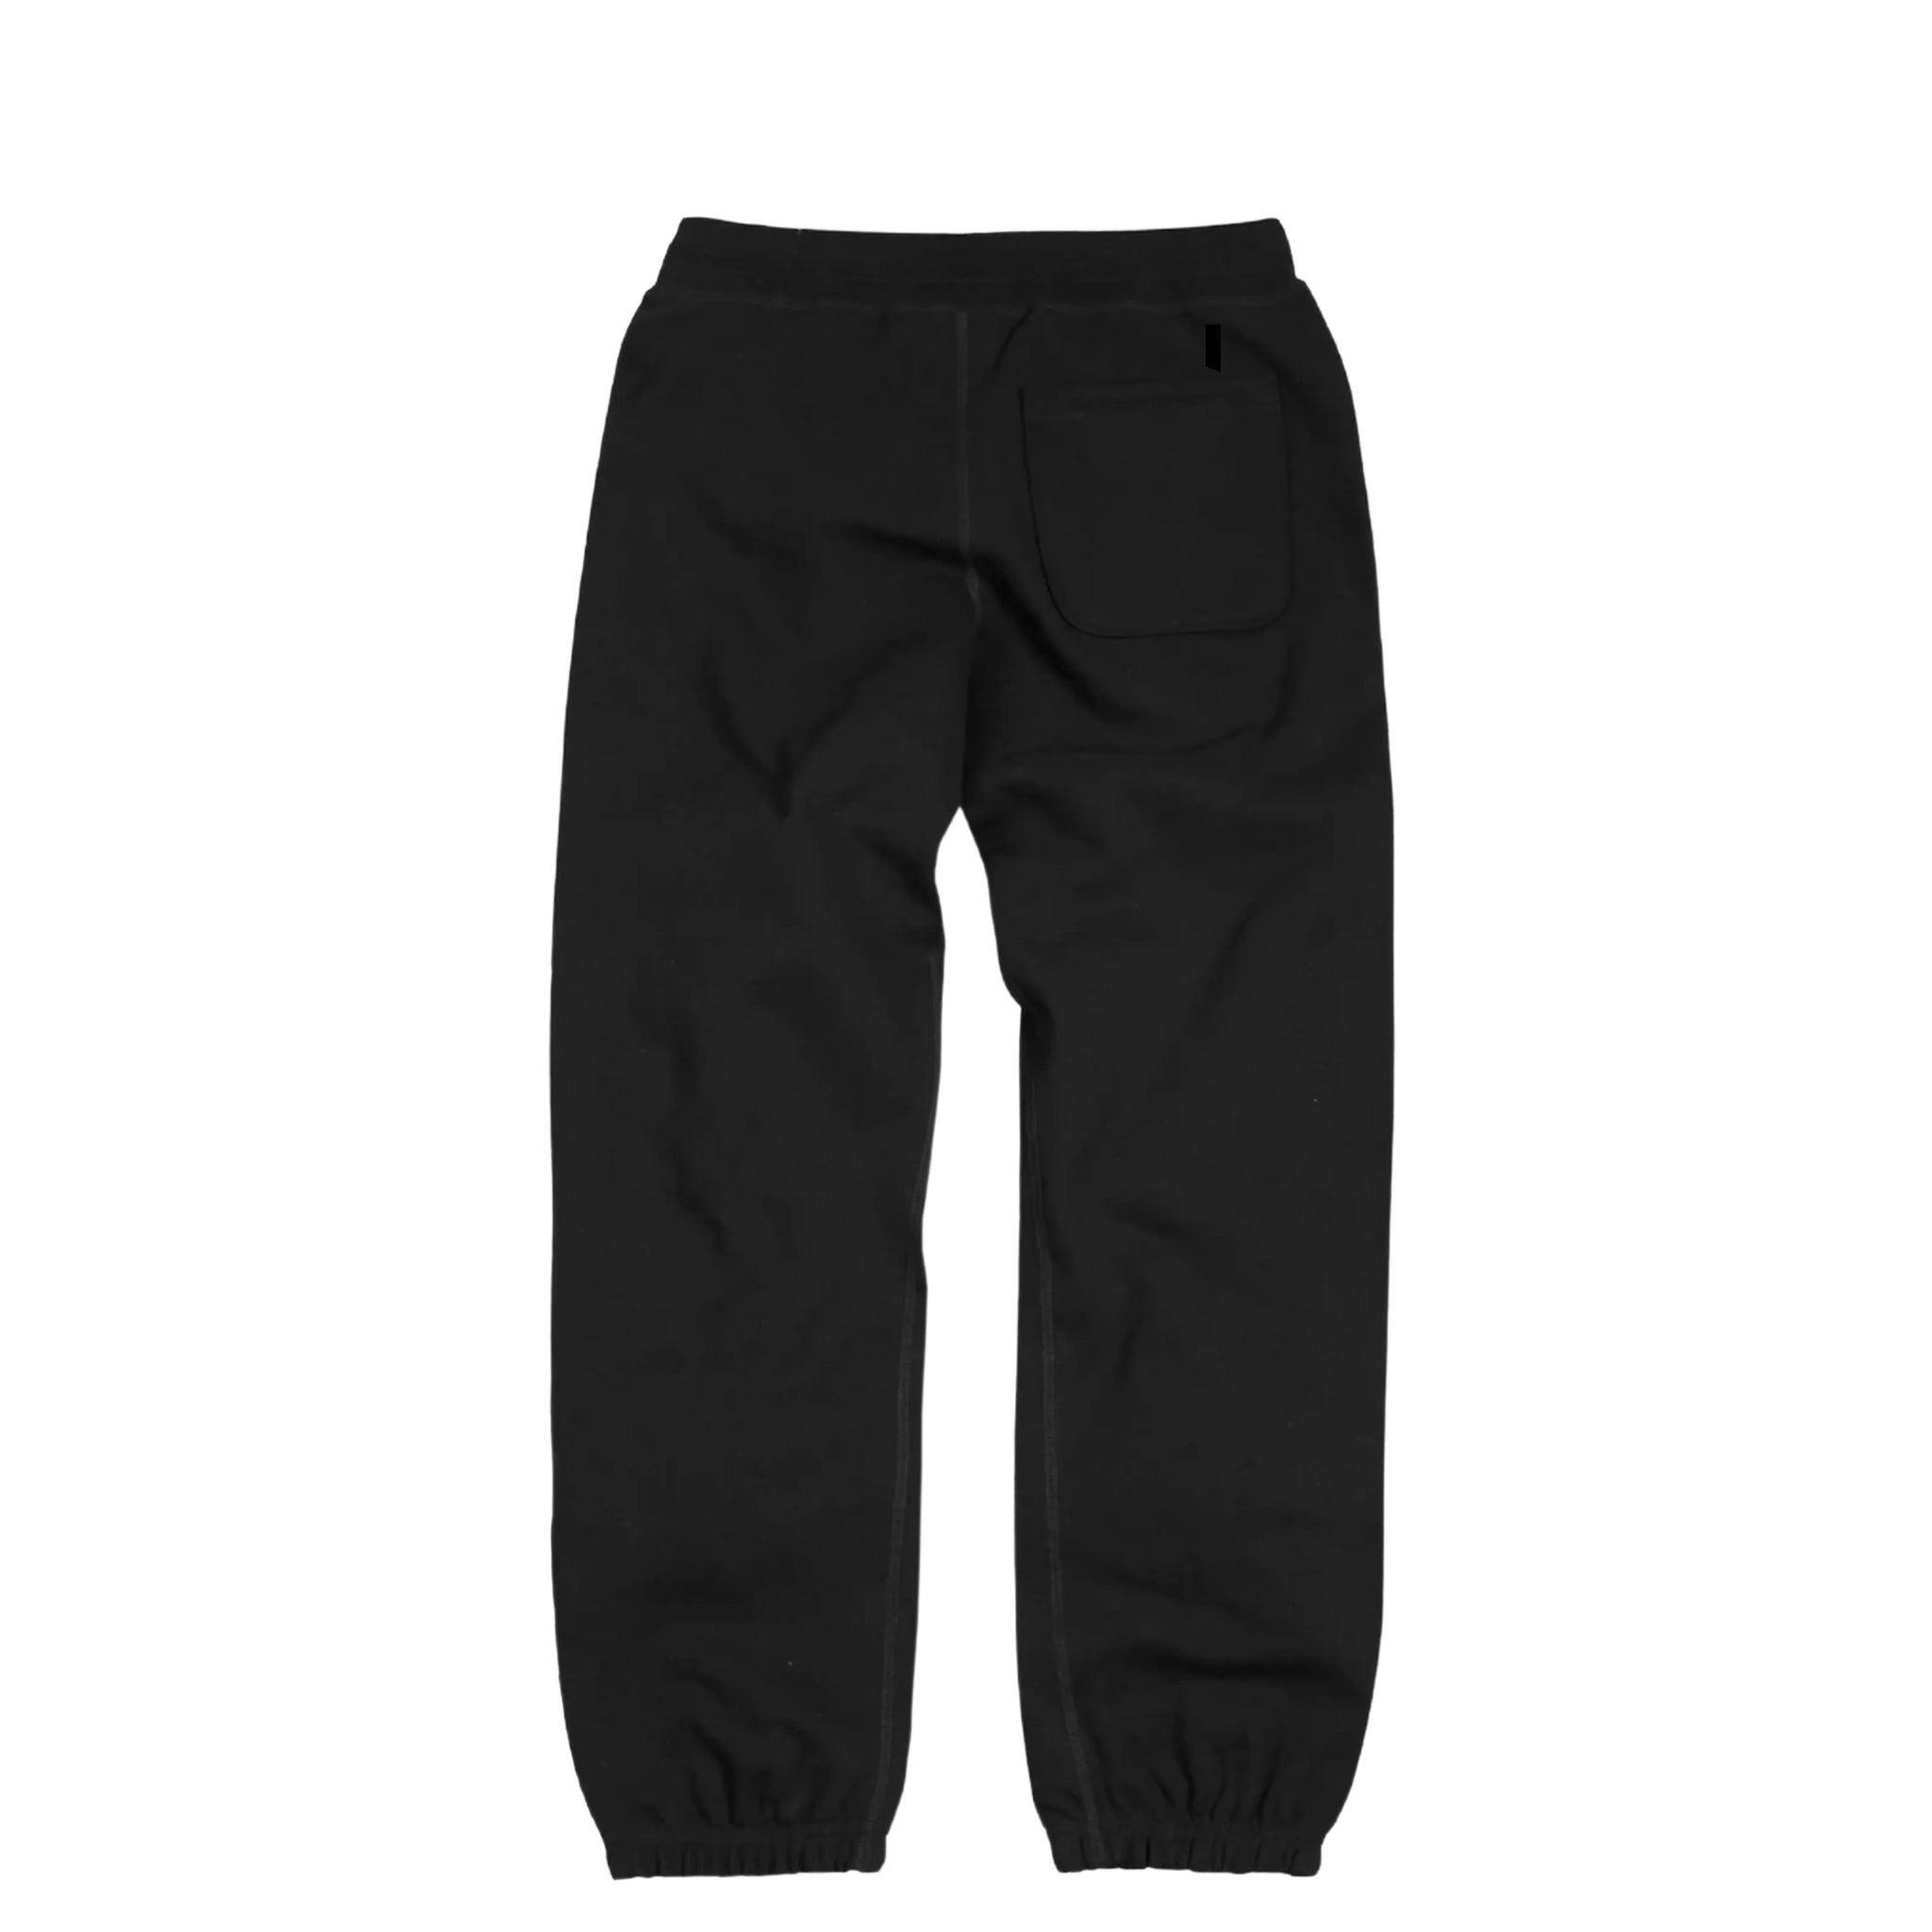 back view of black heavyweight knit joggers against white background